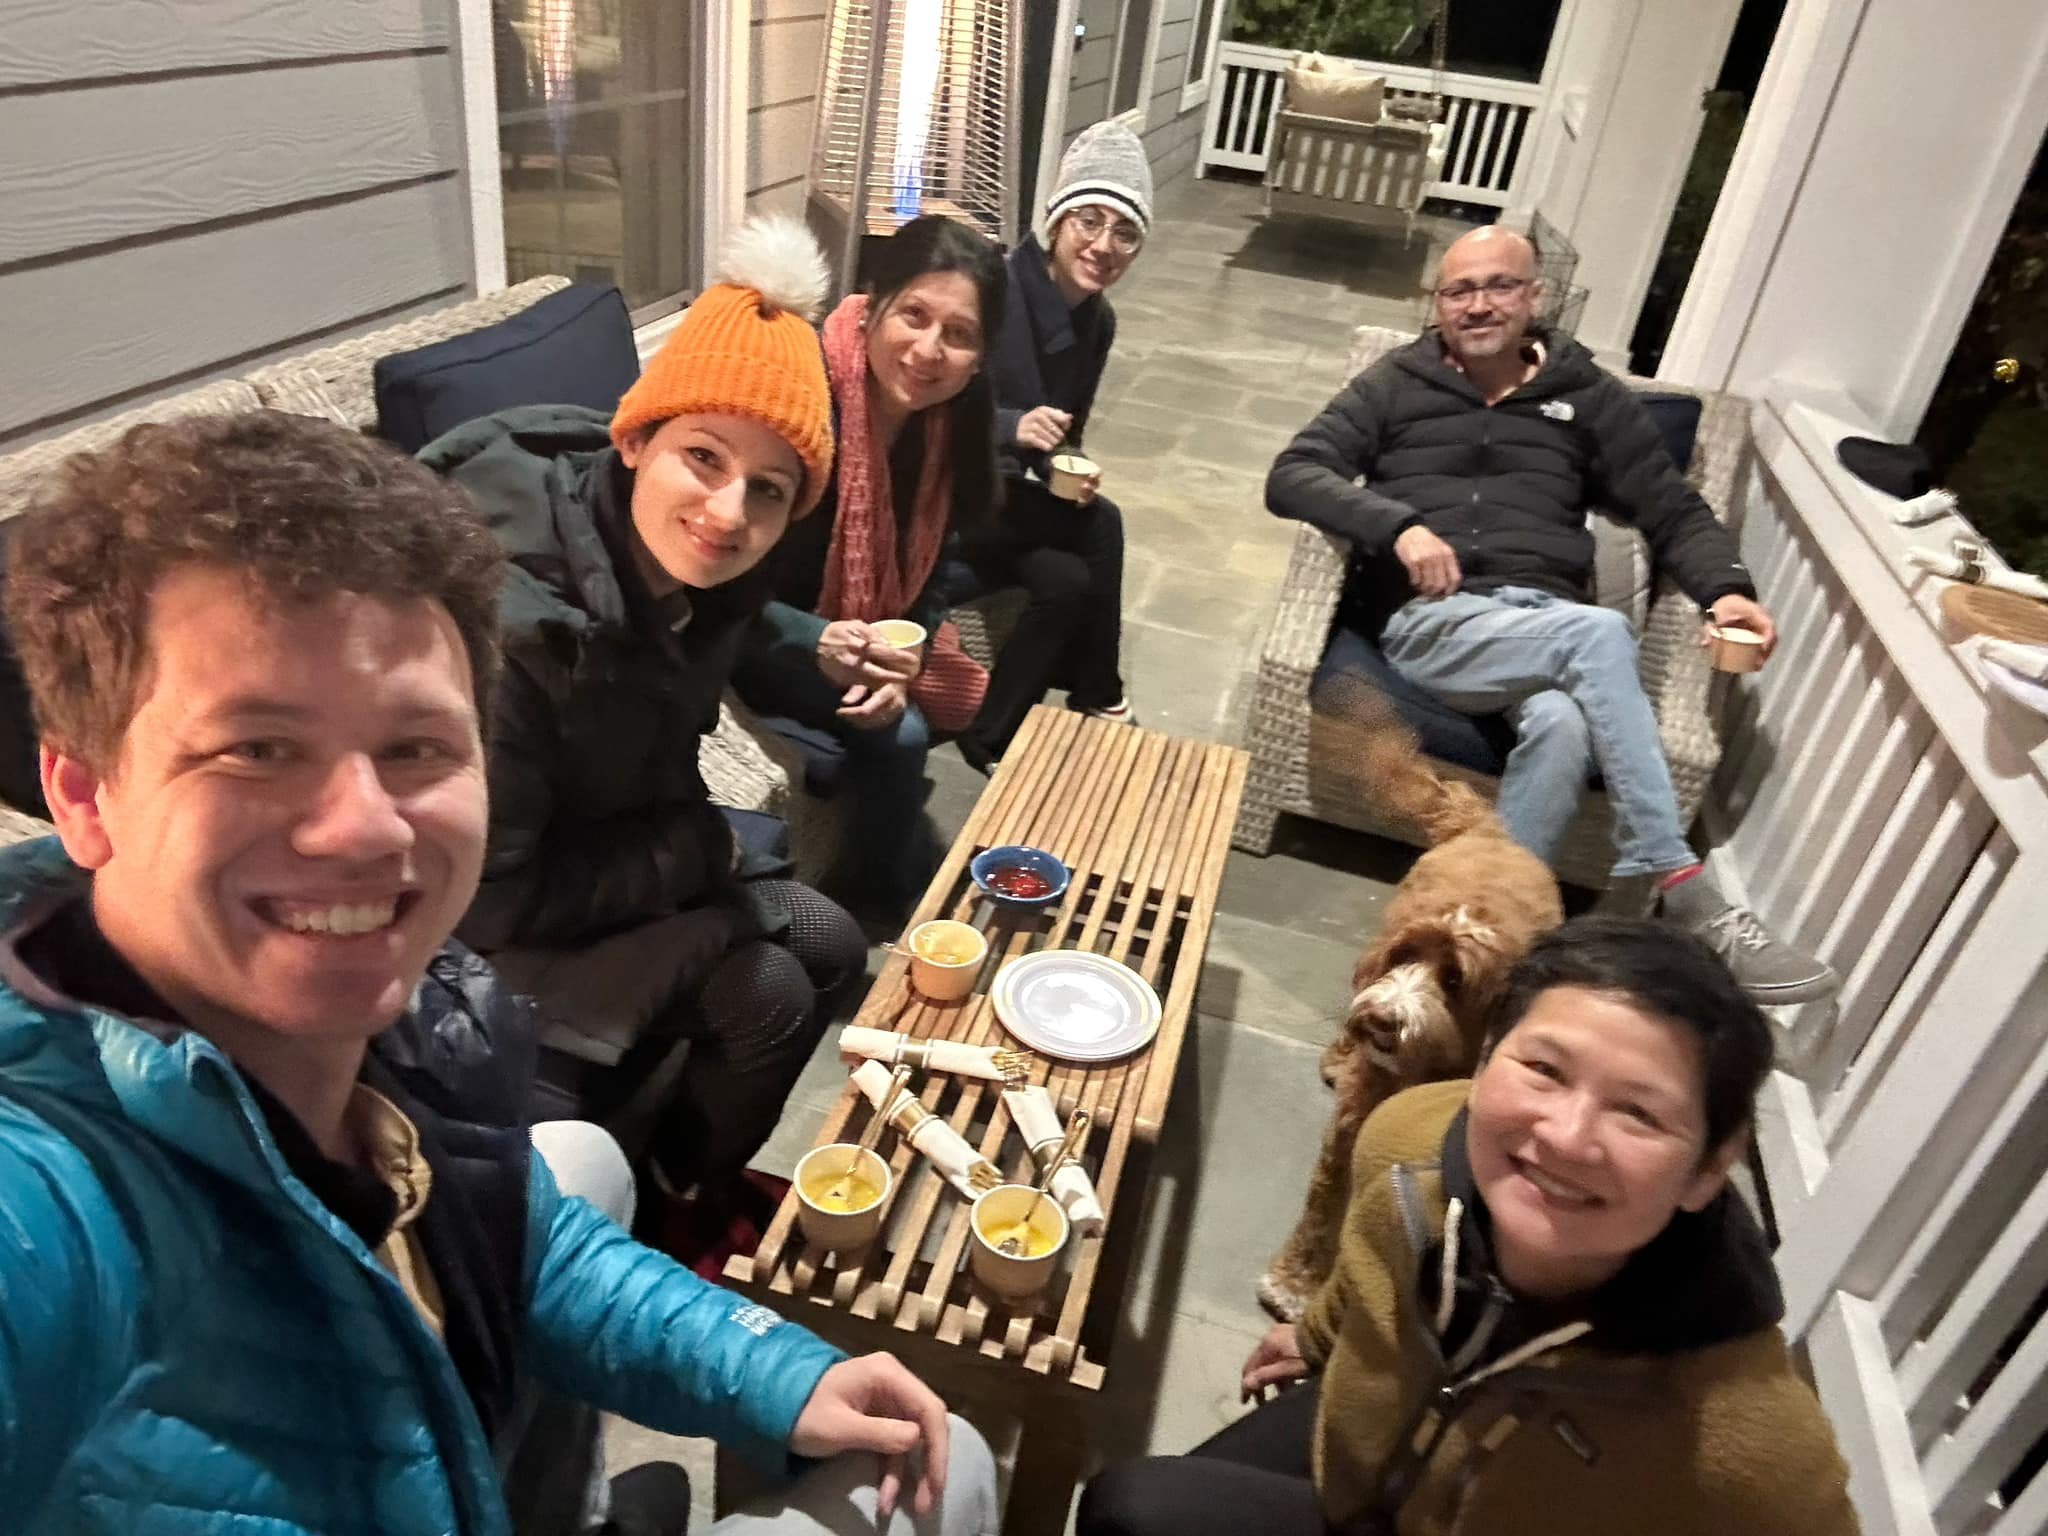  Juhi’s family was lovely to accommodate my request for an outdoor dinner, despite the chilly temperatures. 